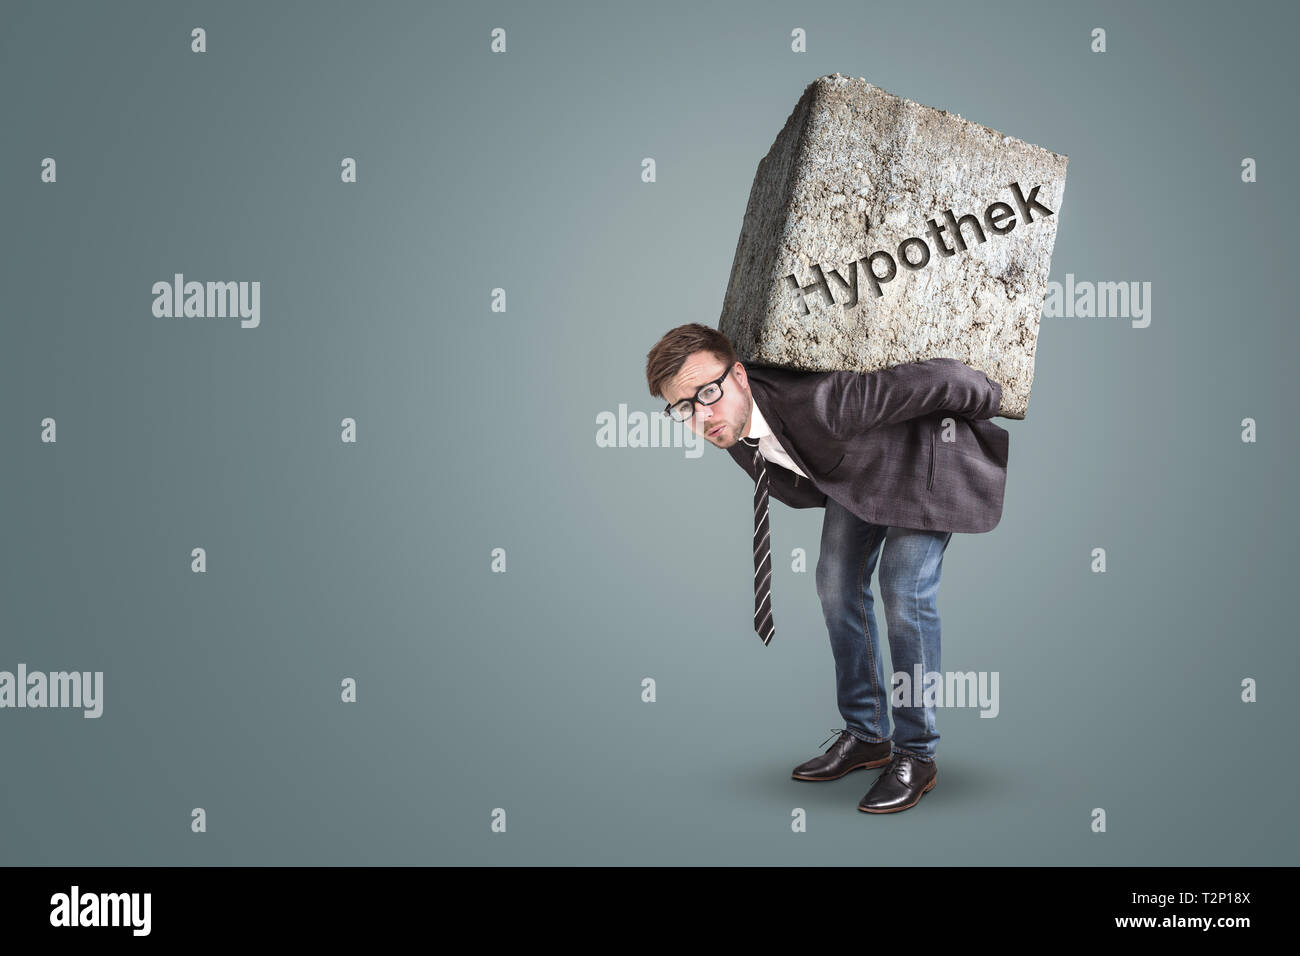 Concept of a man carrying a large stone with the German word “Hypothek” on it Stock Photo